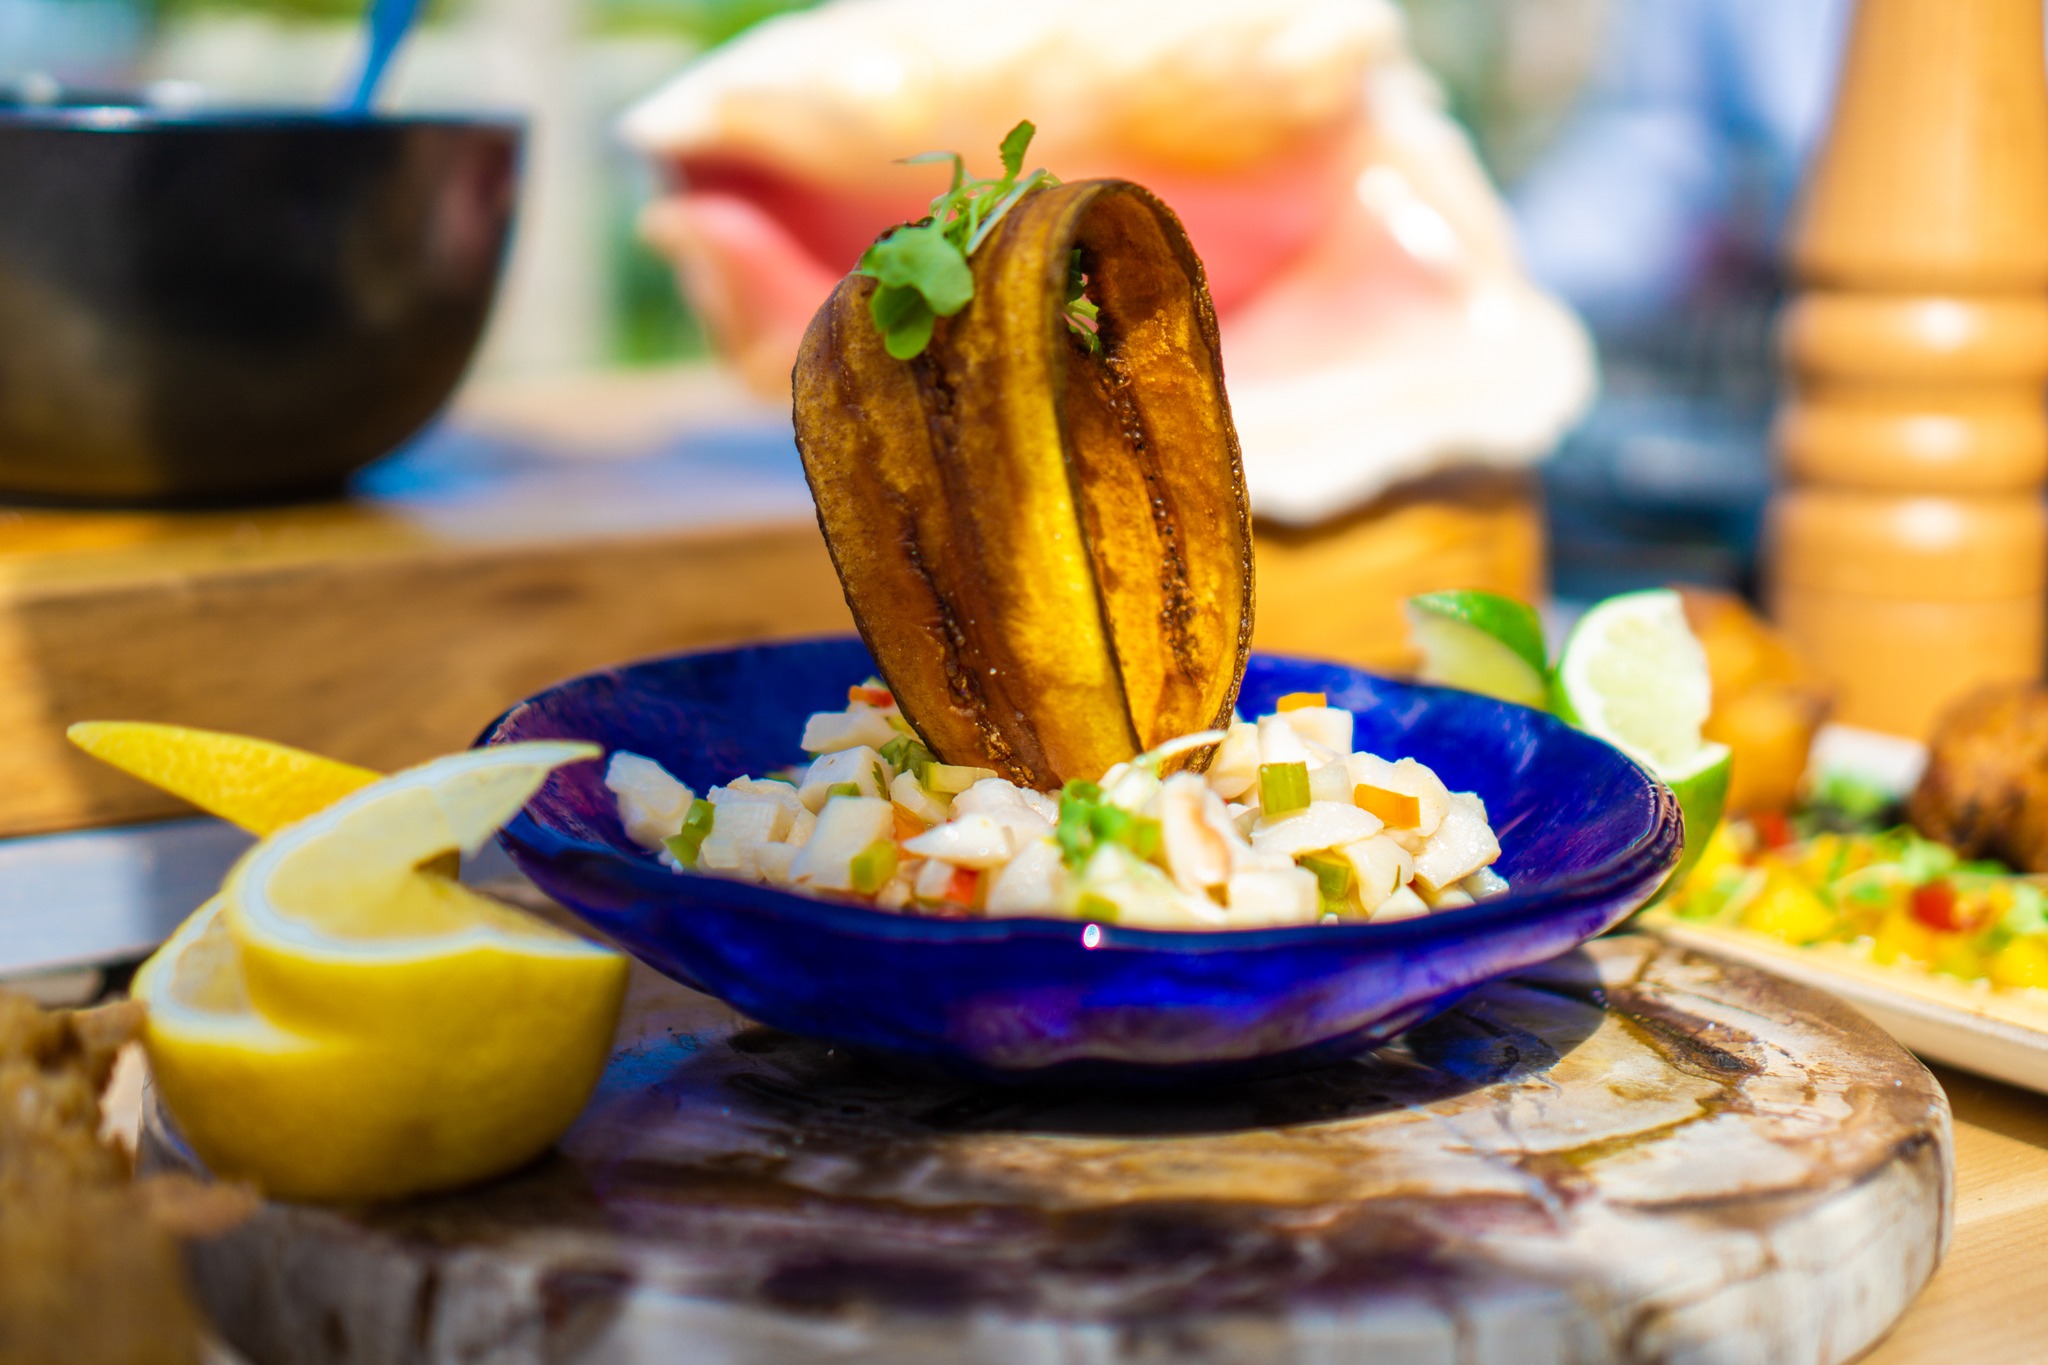 Best Popular Foods to Try on Vacation in Turks and Caicos